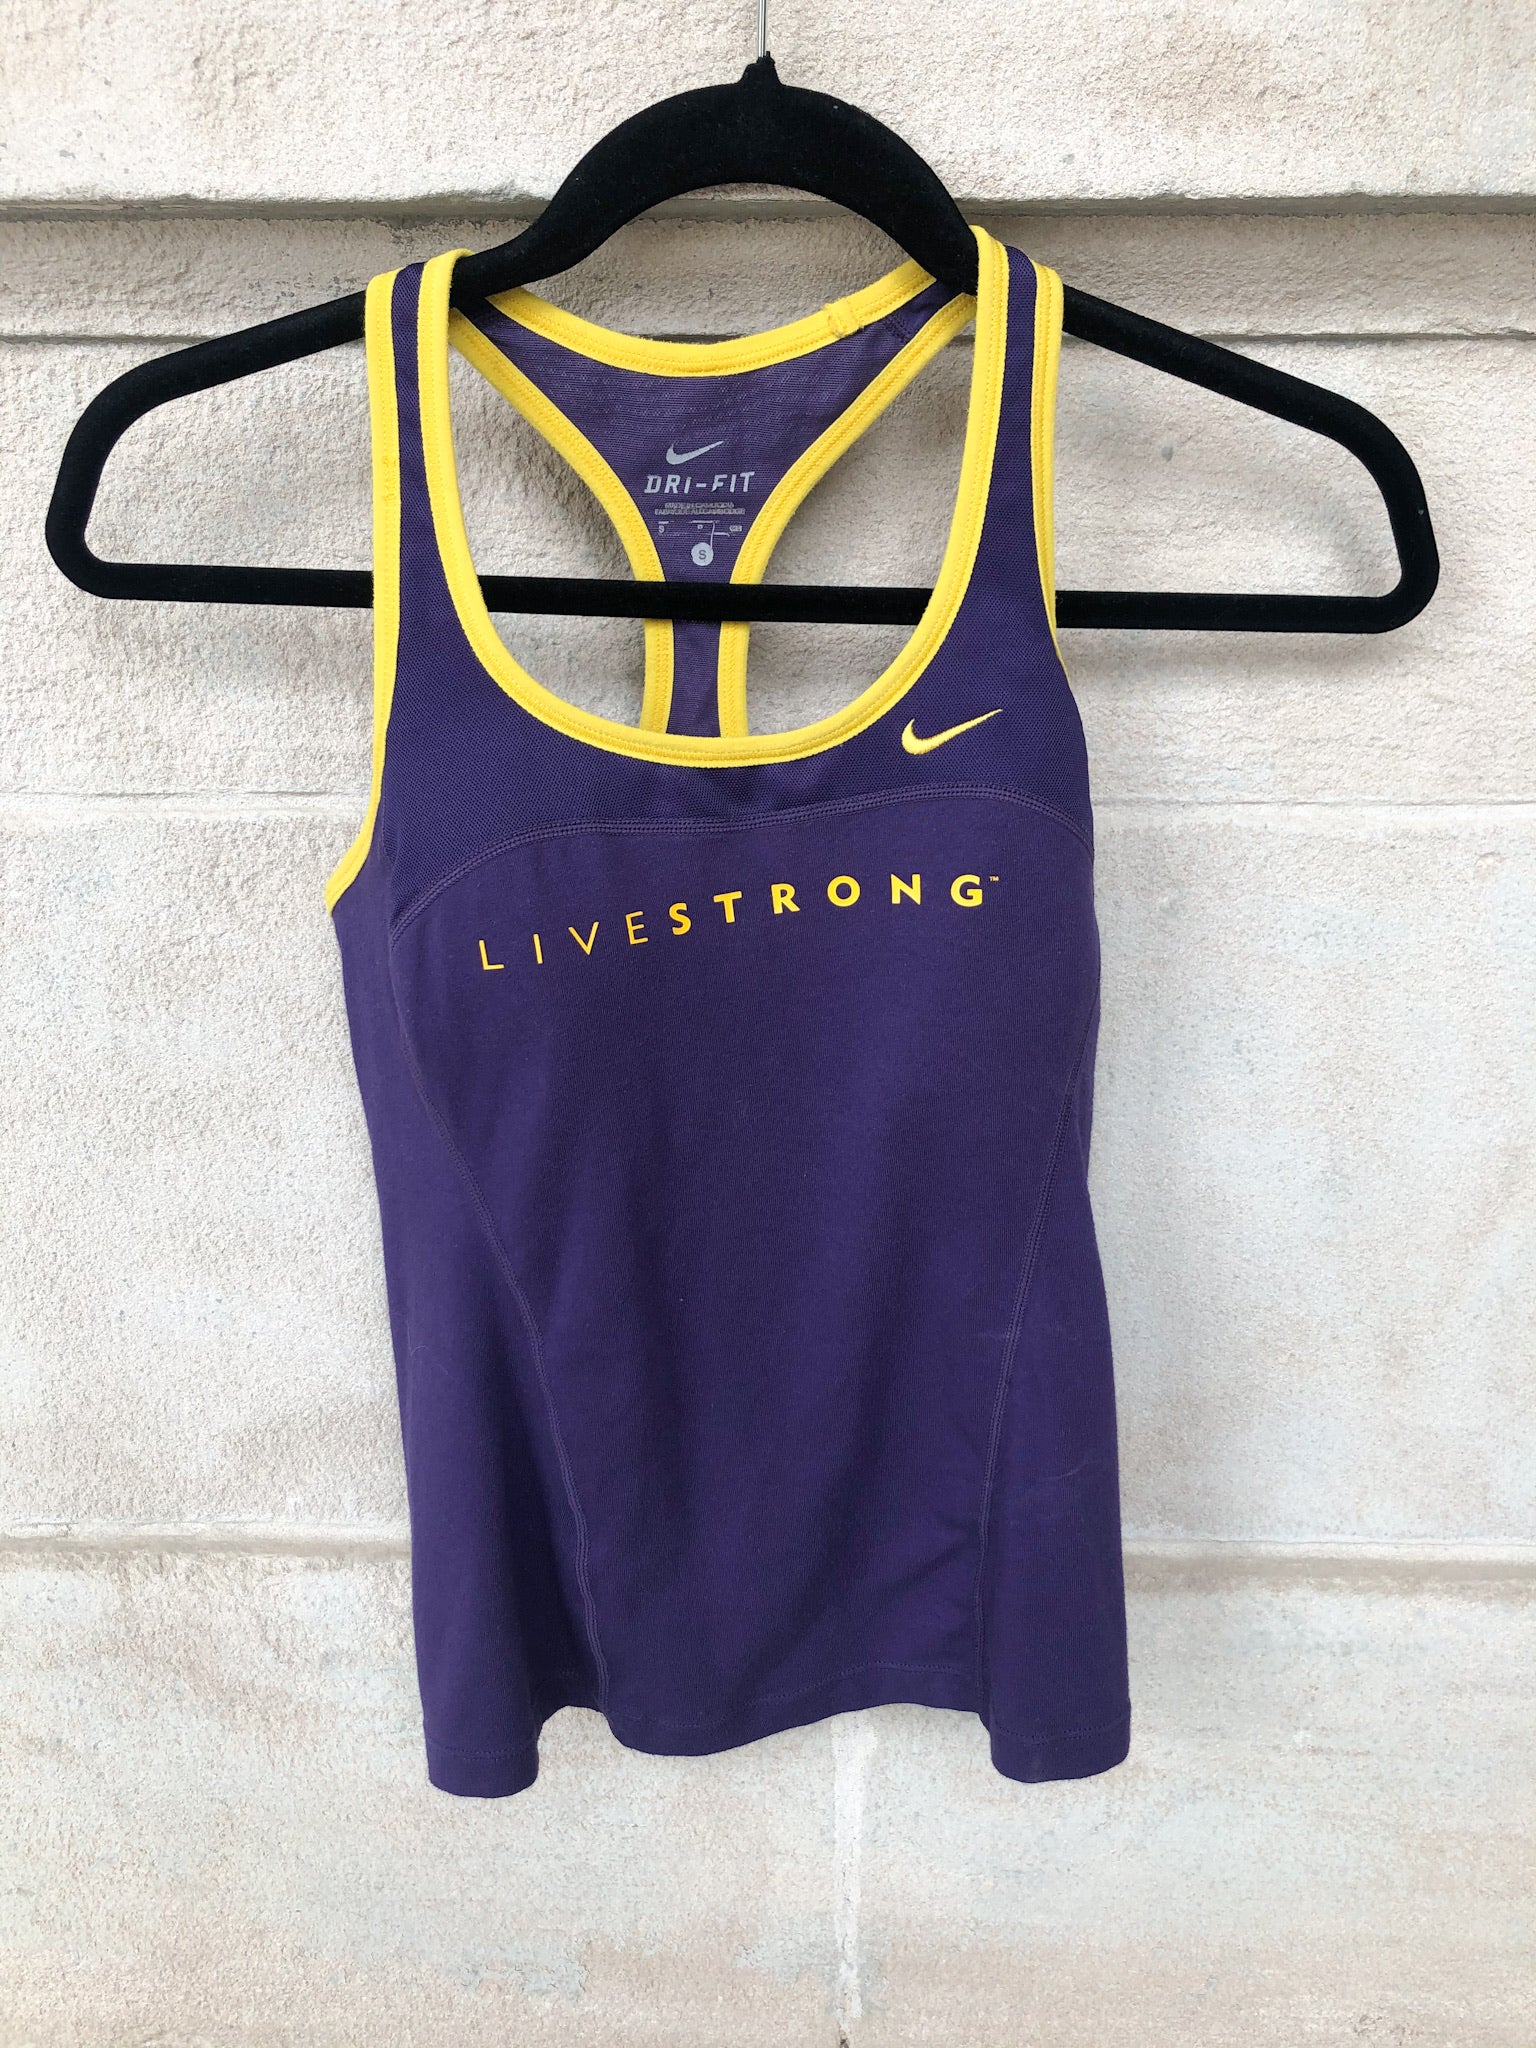 Nike Purple Livestrong Workout Top with in Bra - Small – Le Prix Fashion & Consulting